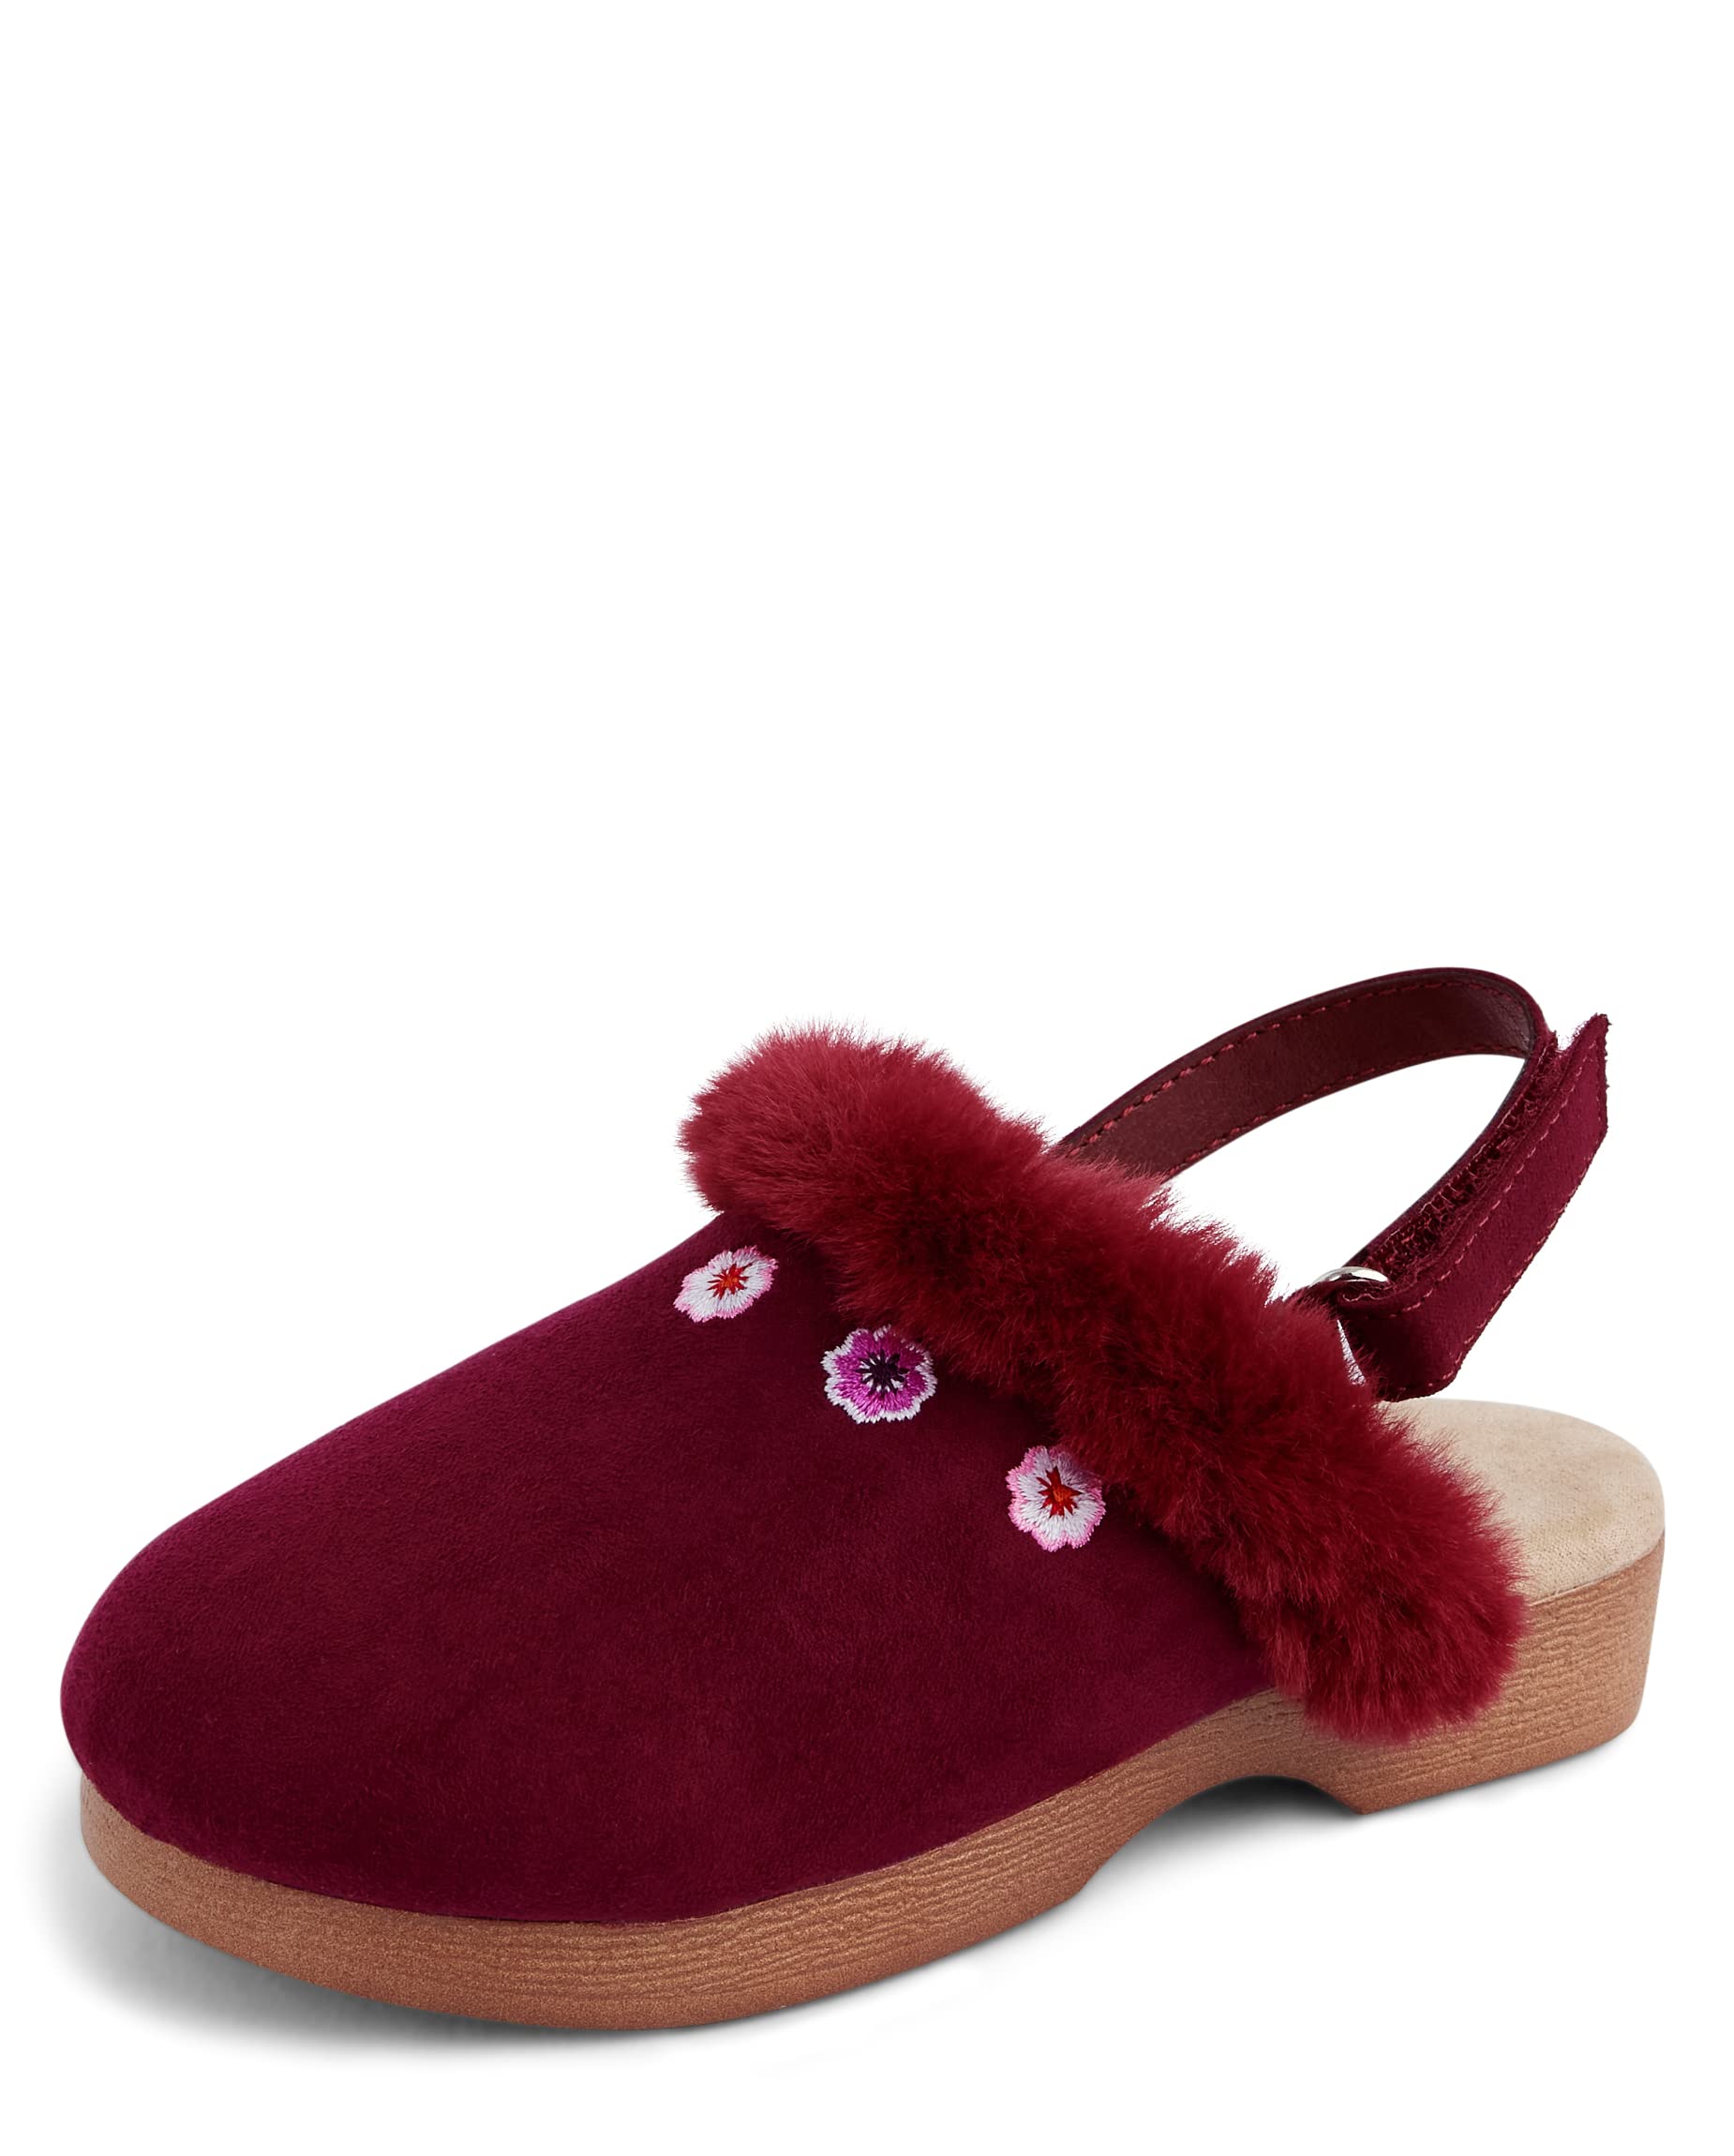 Gymboree, and Toddler Girls Faux Suede Clogs,Spice MKT RUBINE,3